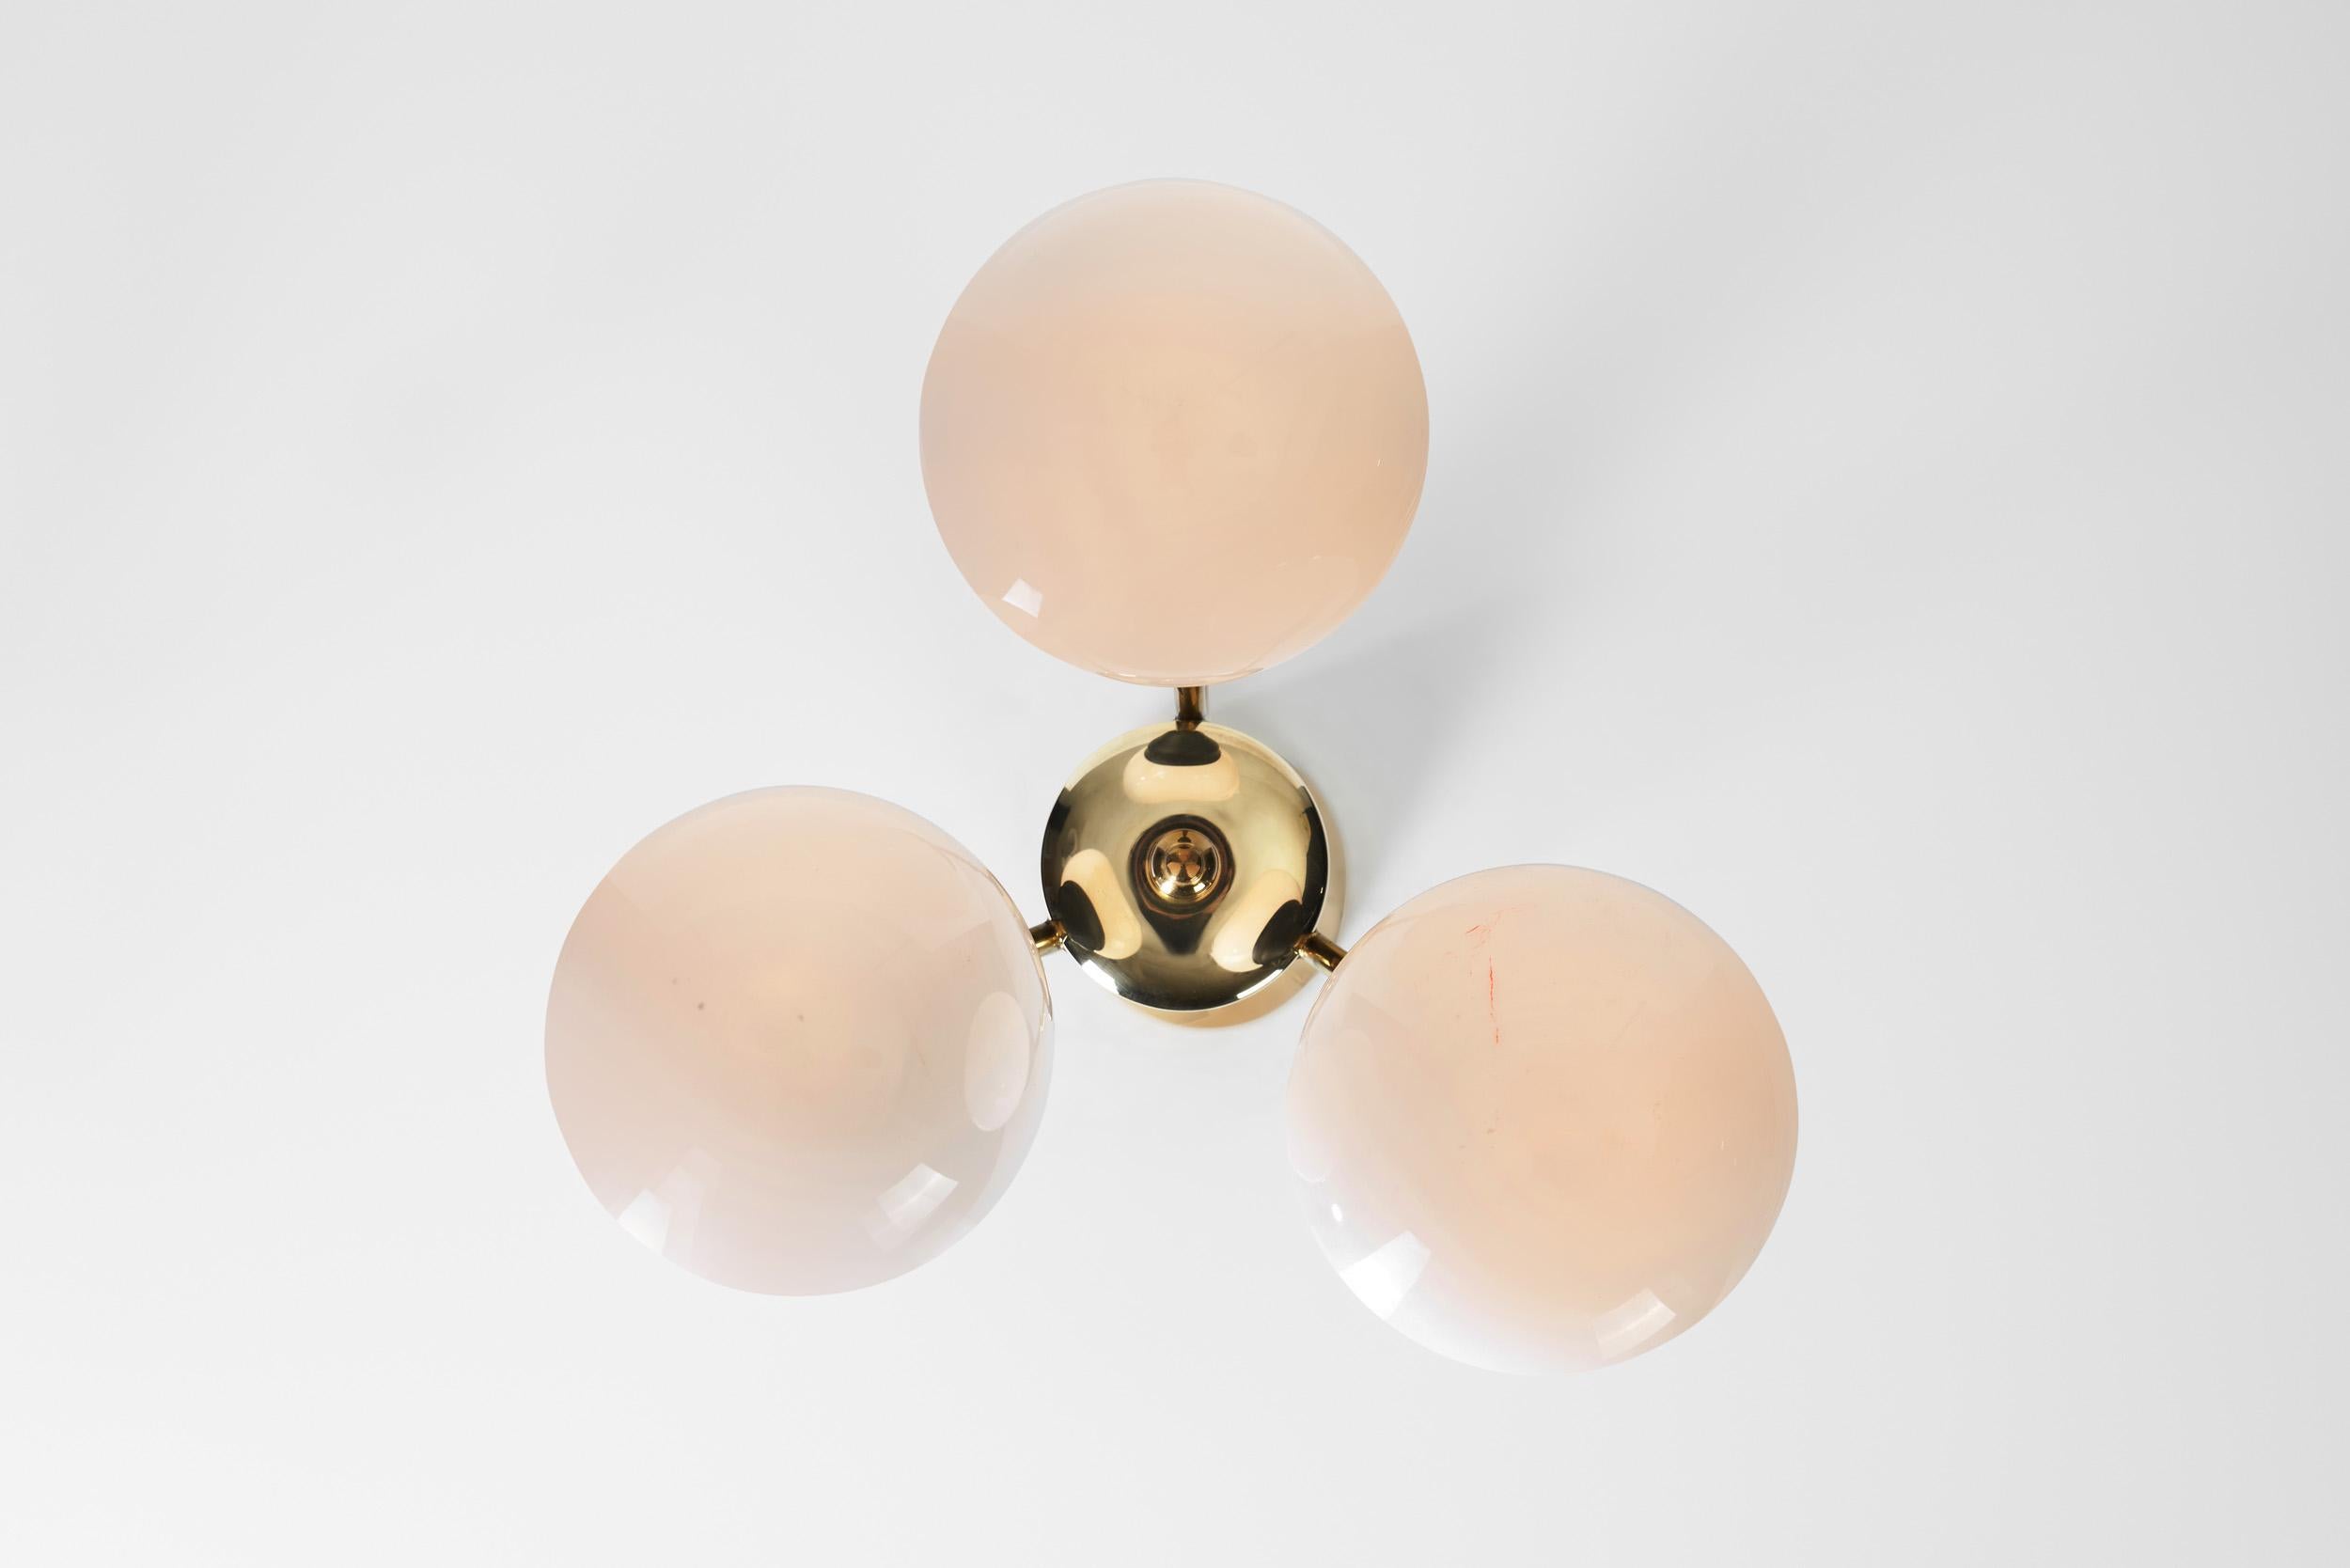 Mid-Century Modern Brass and Glass Ceiling Lamp, Europe, circa 1950s For Sale 8